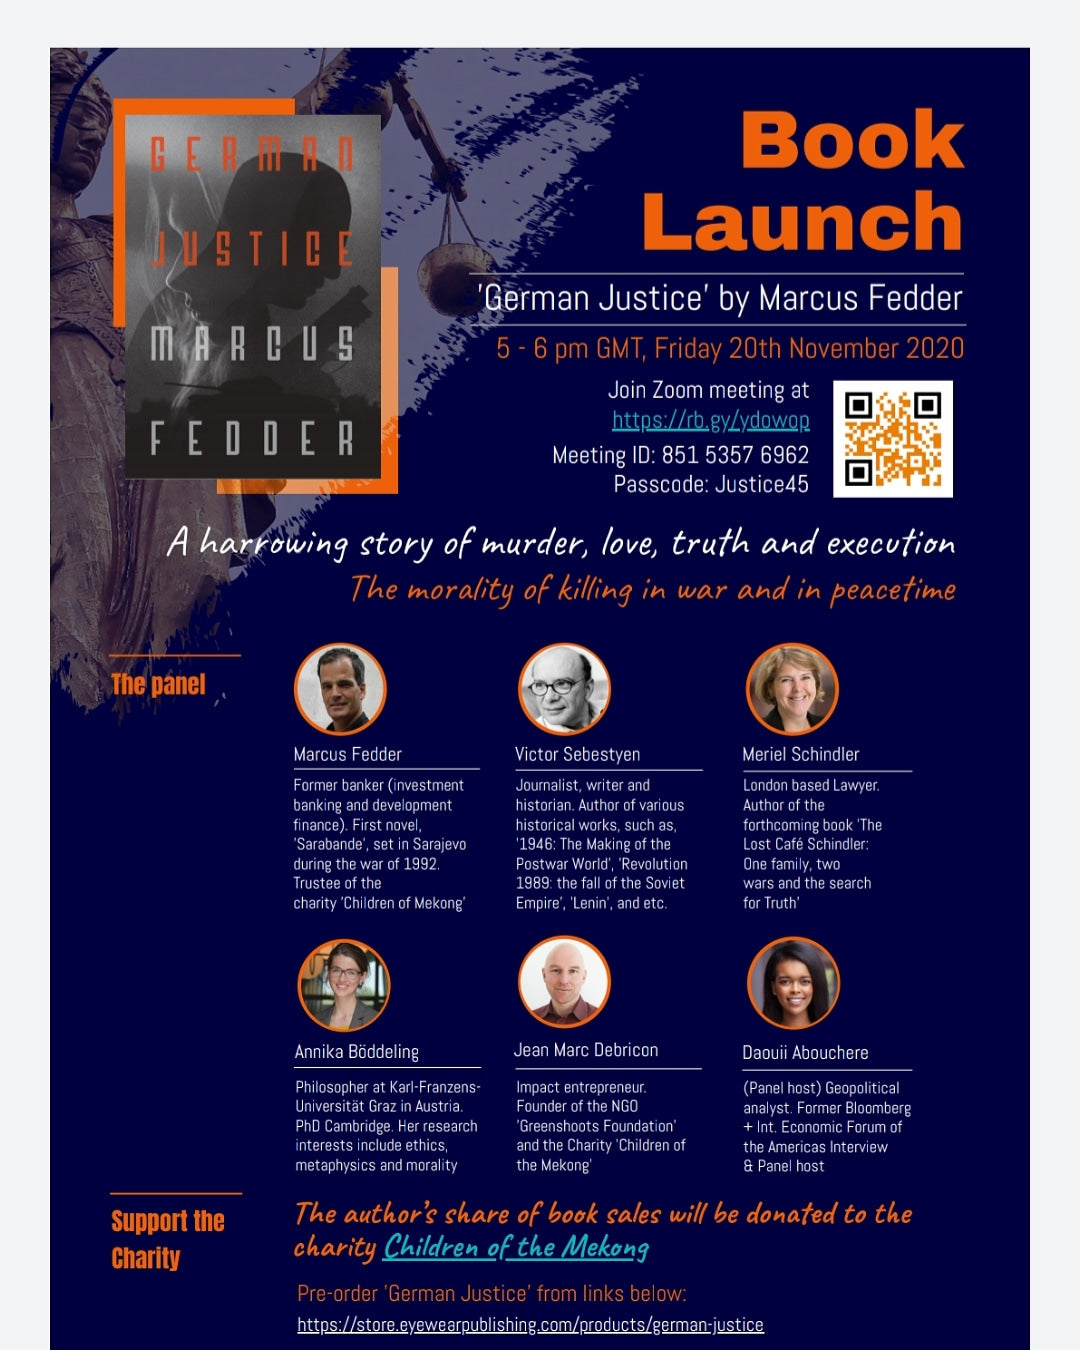 BOOK LAUNCH TODAY FOR GERMAN JUSTICE!